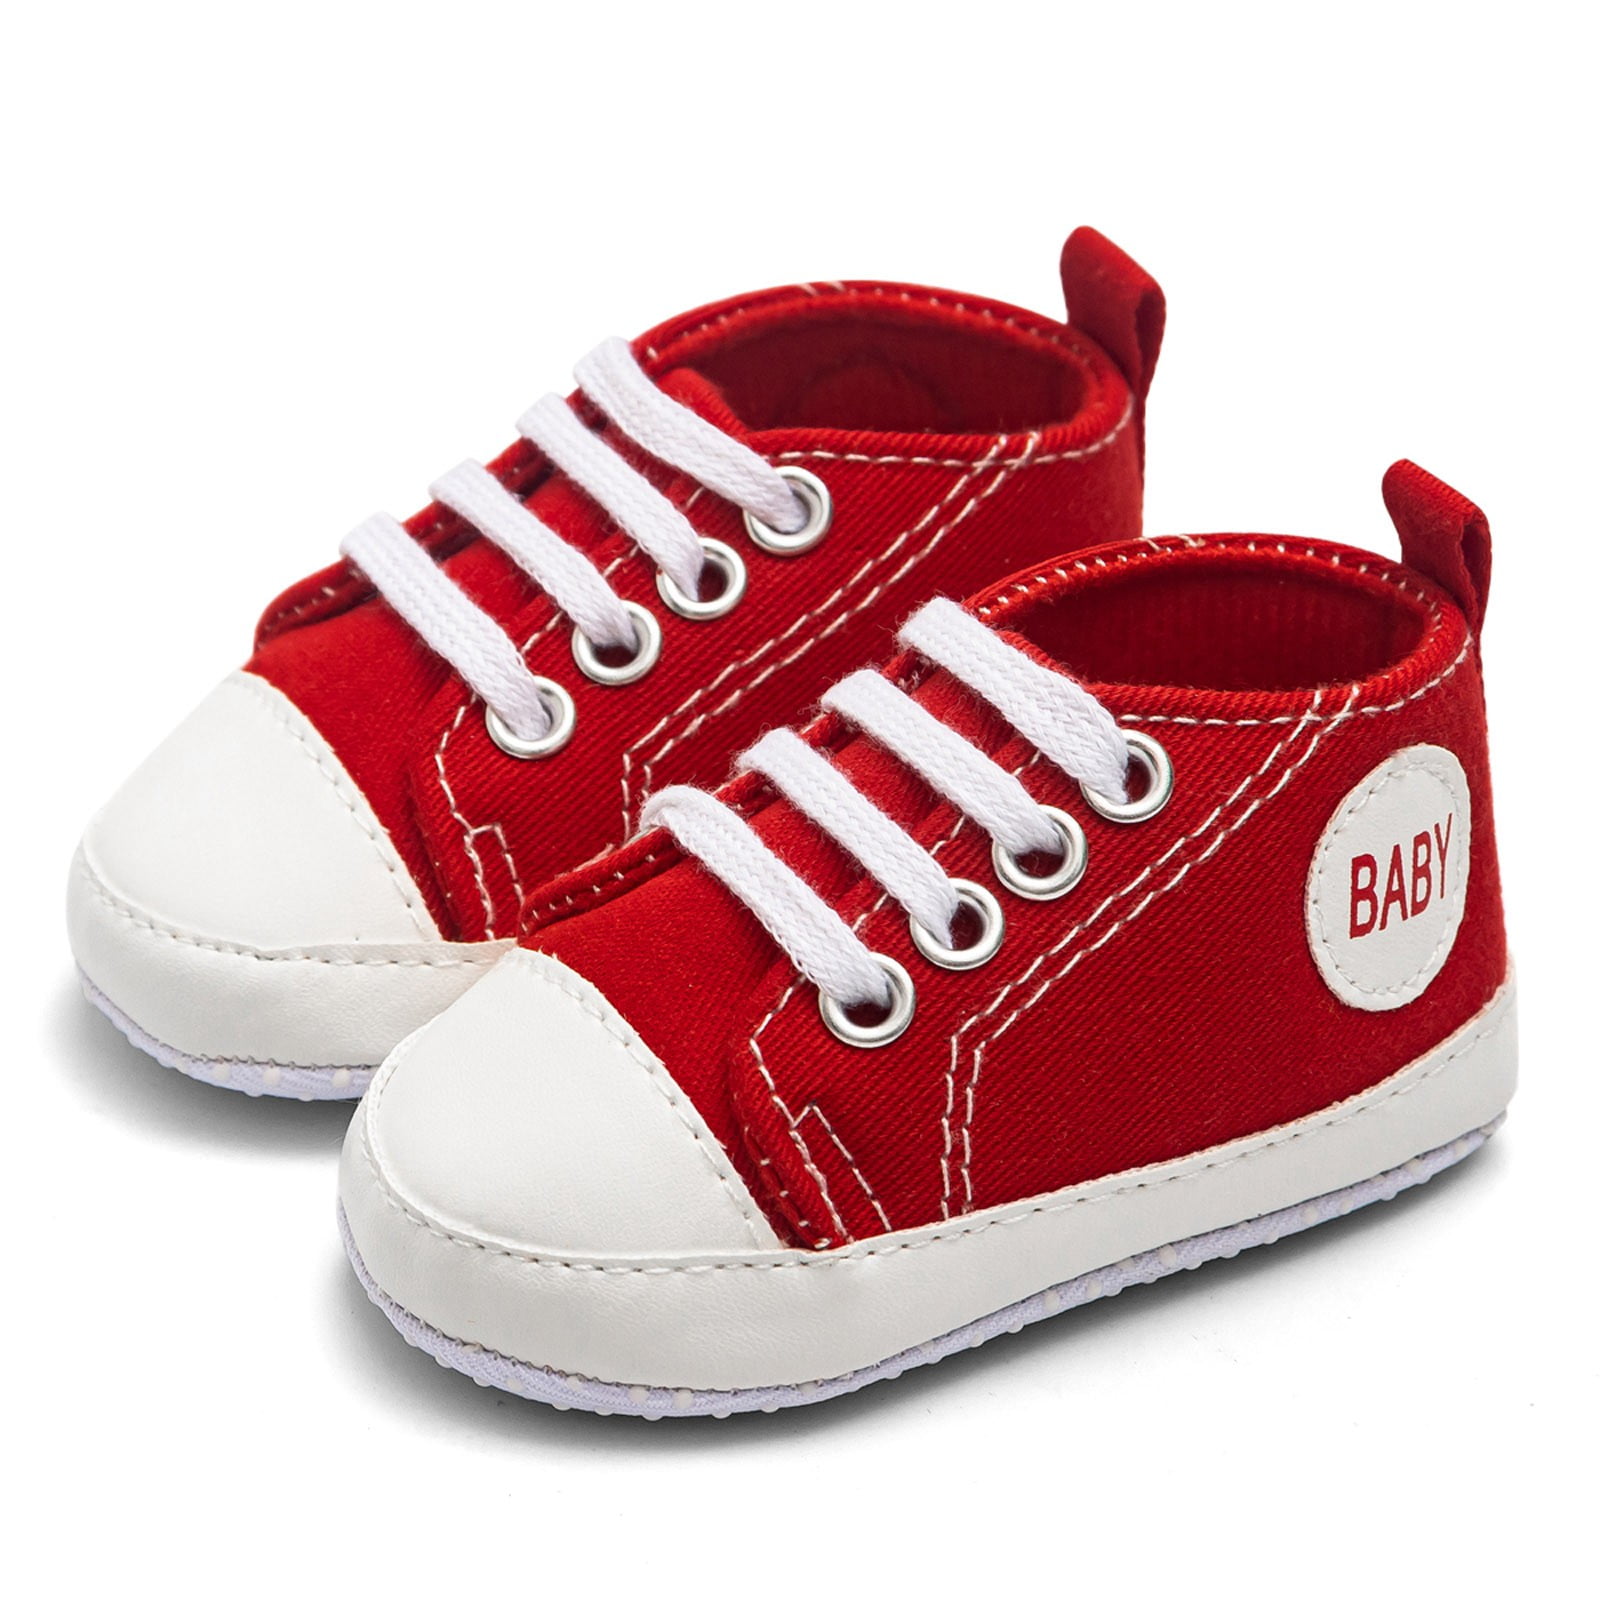 Newborn Infant Toddler Baby Sneakers Girl Canvas Single Soft Sole Shoes Colorful 